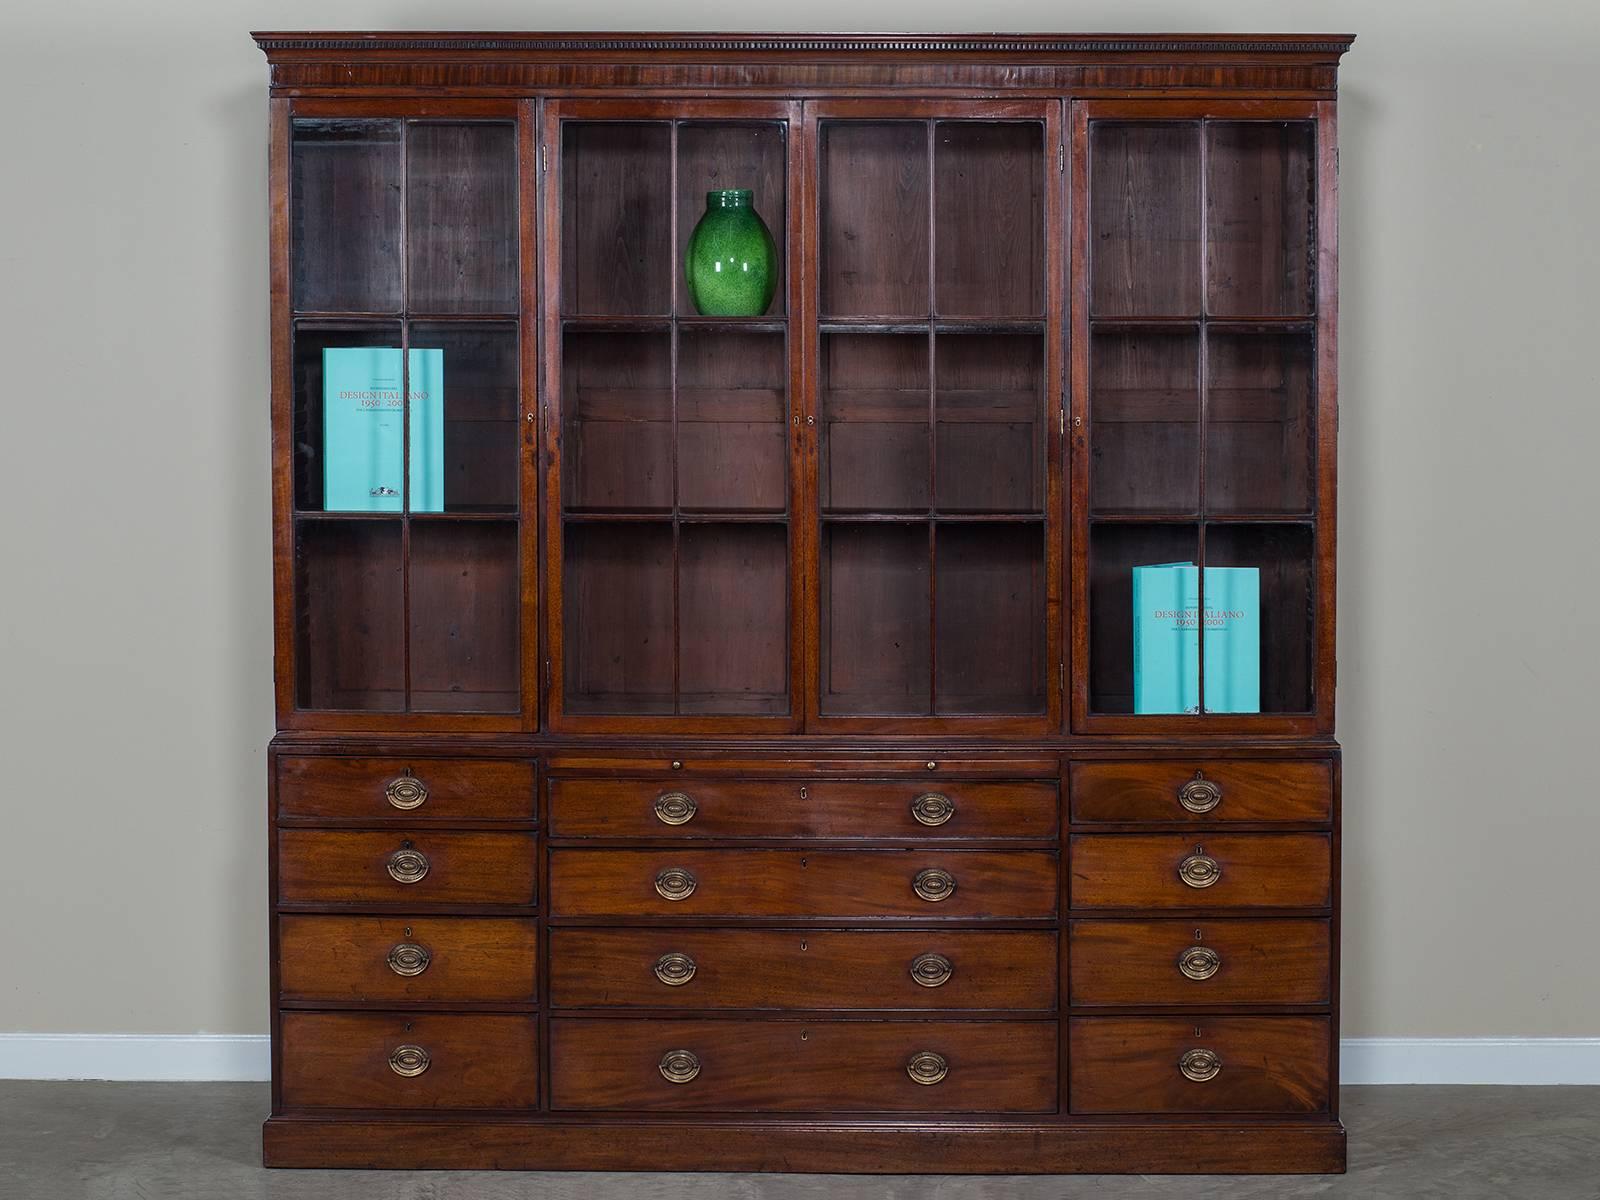 Receive our new selections direct from 1stdibs by email each week. Please click Follow Dealer below and see them first!

This is a unique piece of antique English cabinetry, circa 1780 for several reasons. The upper section has four rectangular